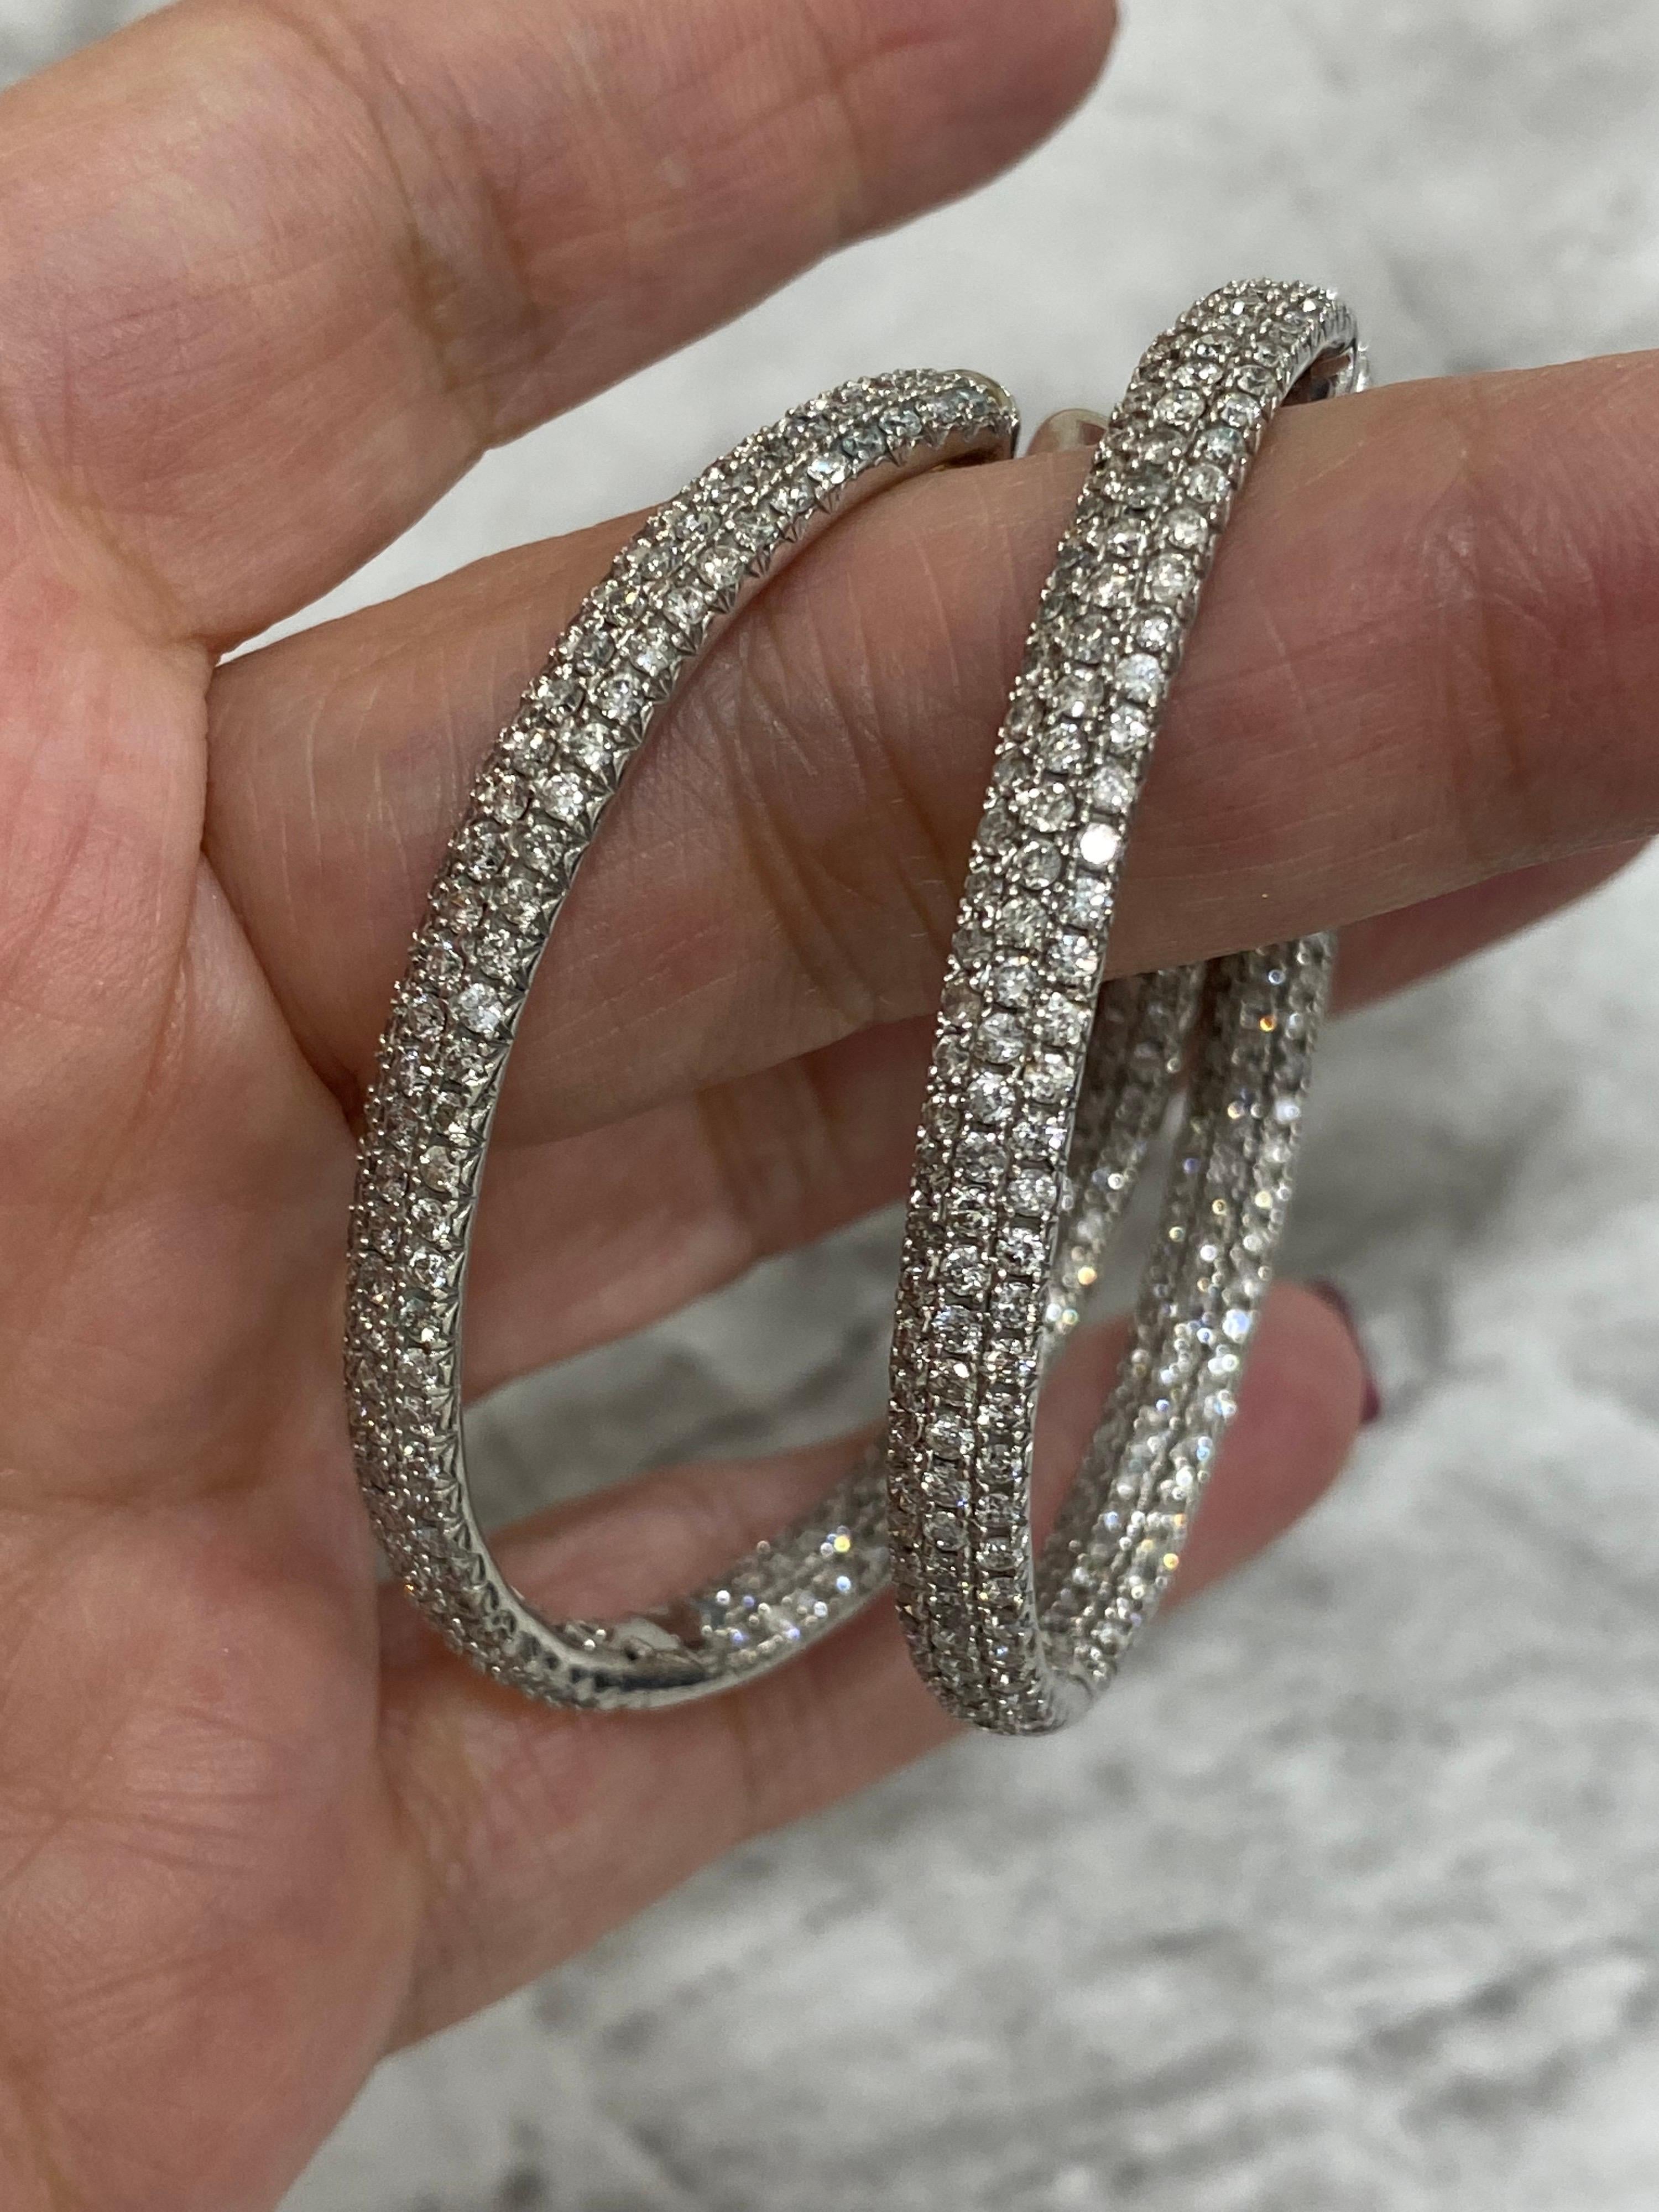 Contemporary 7 Carat Diamond  White Gold Inside- Out Hoop Earrings